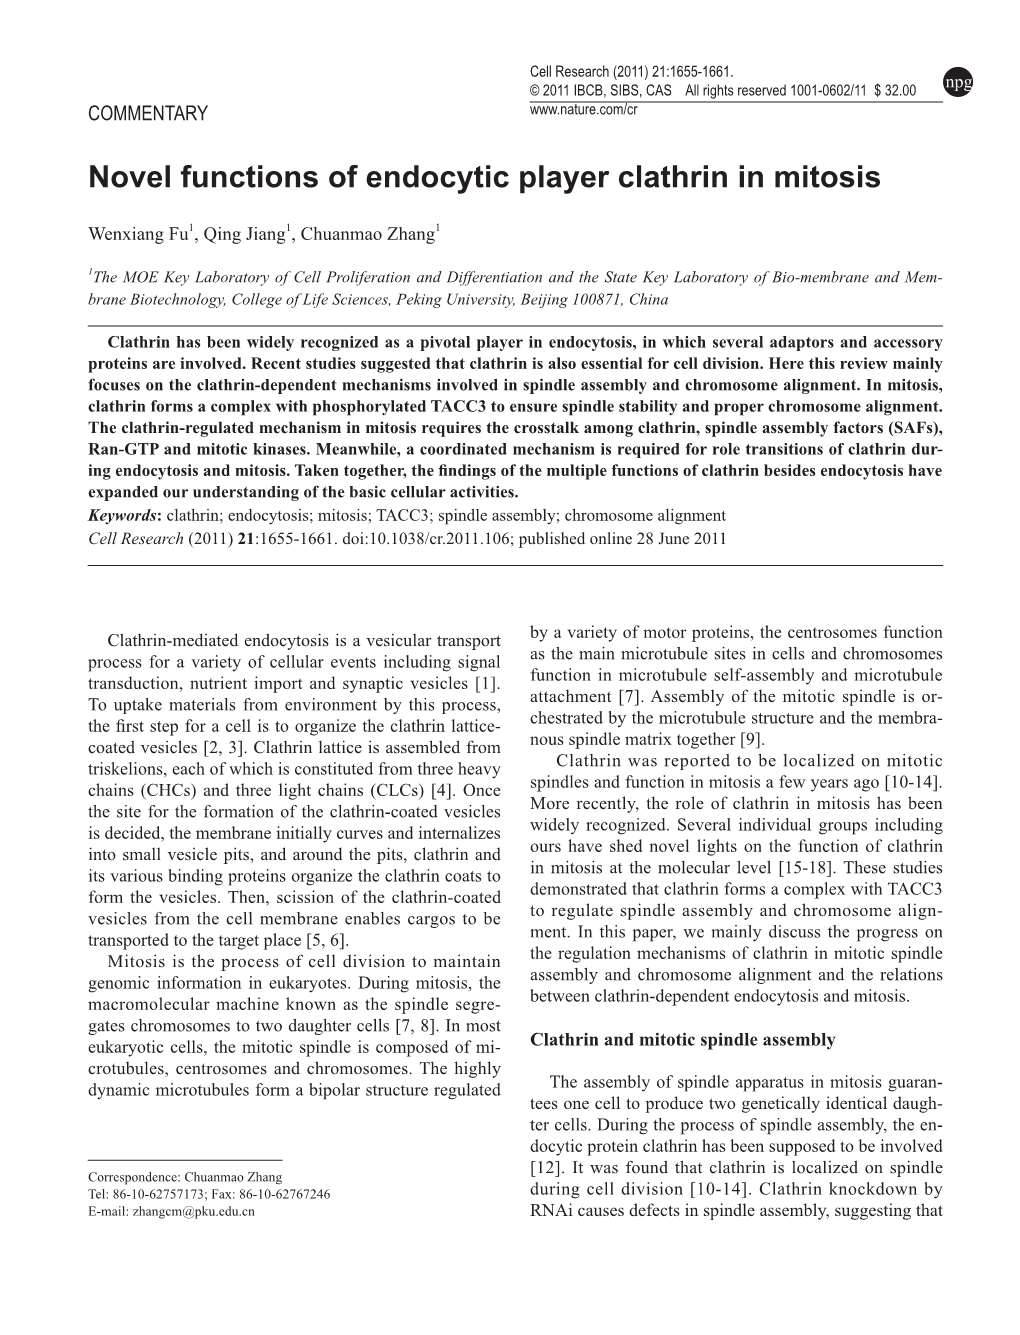 Novel Functions of Endocytic Player Clathrin in Mitosis